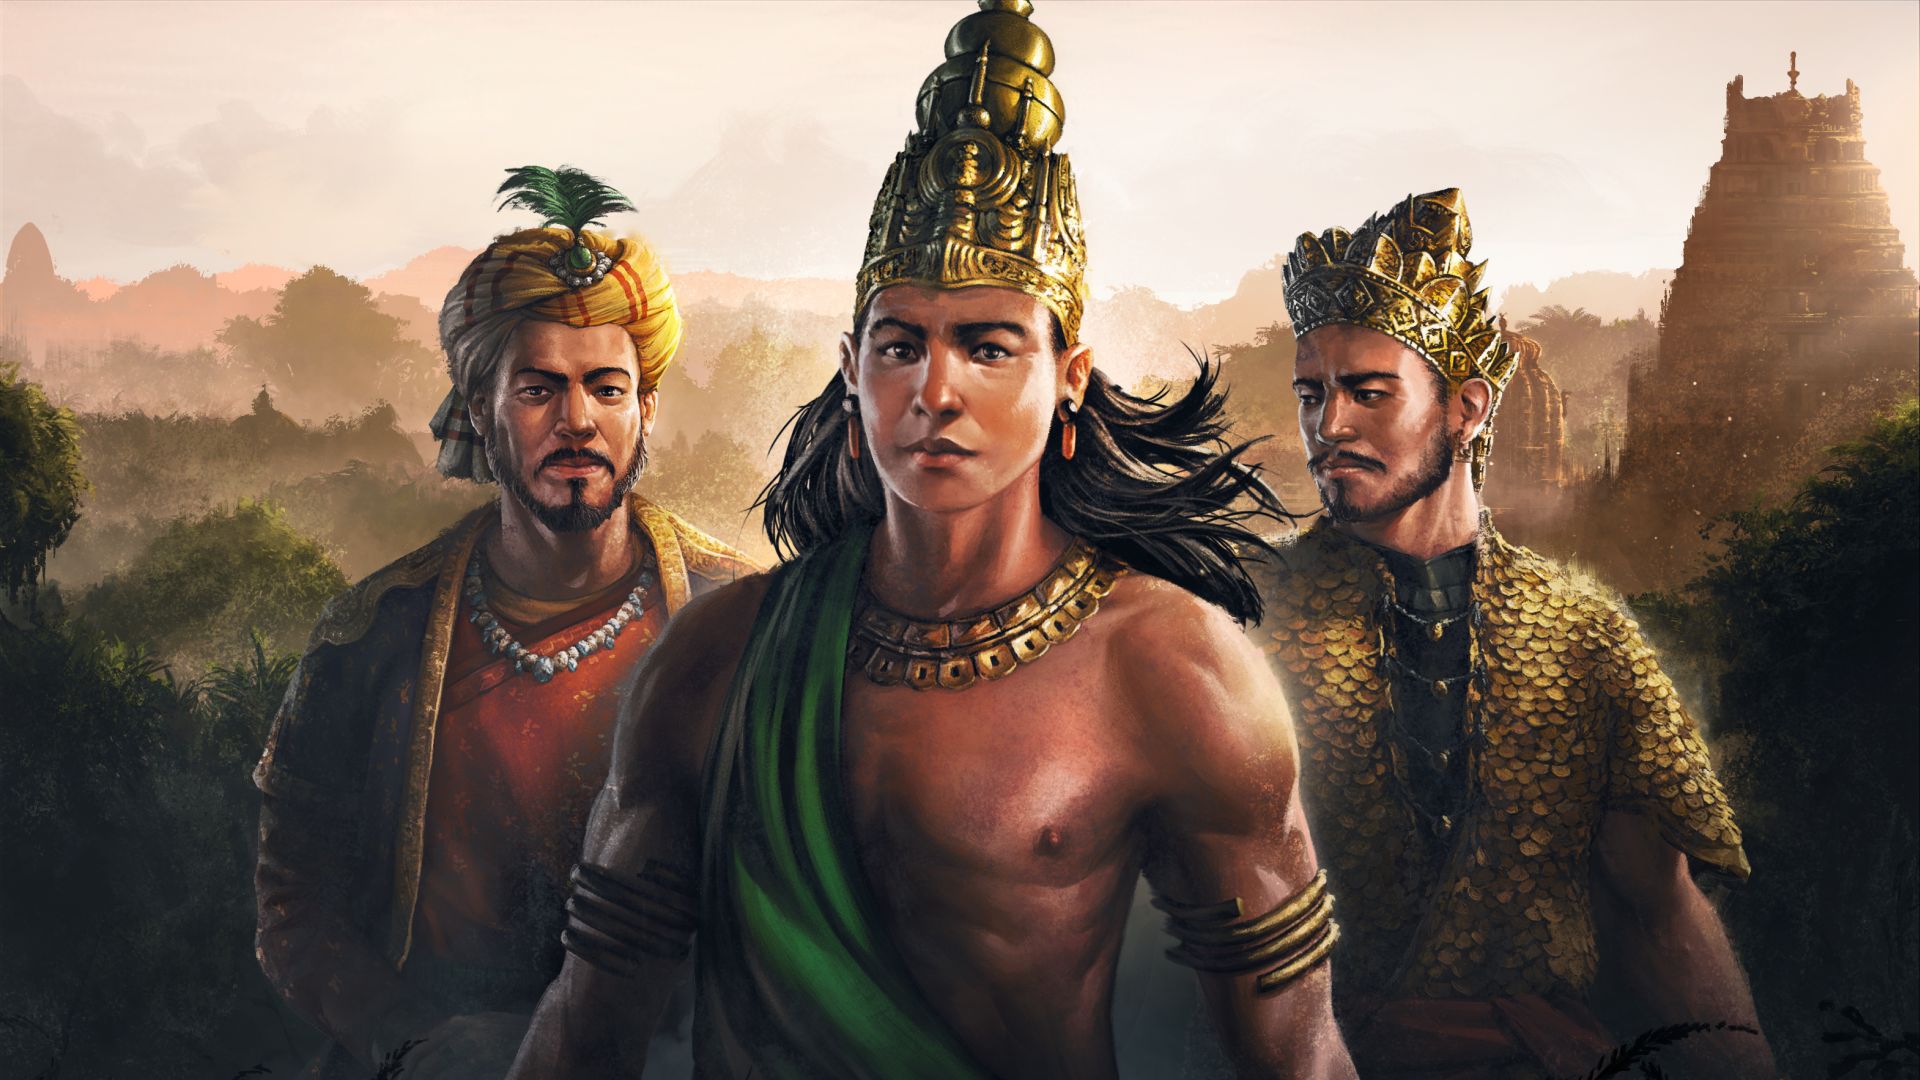 Age of Empires II: Definitive Edition – Dynasties of India Key Art